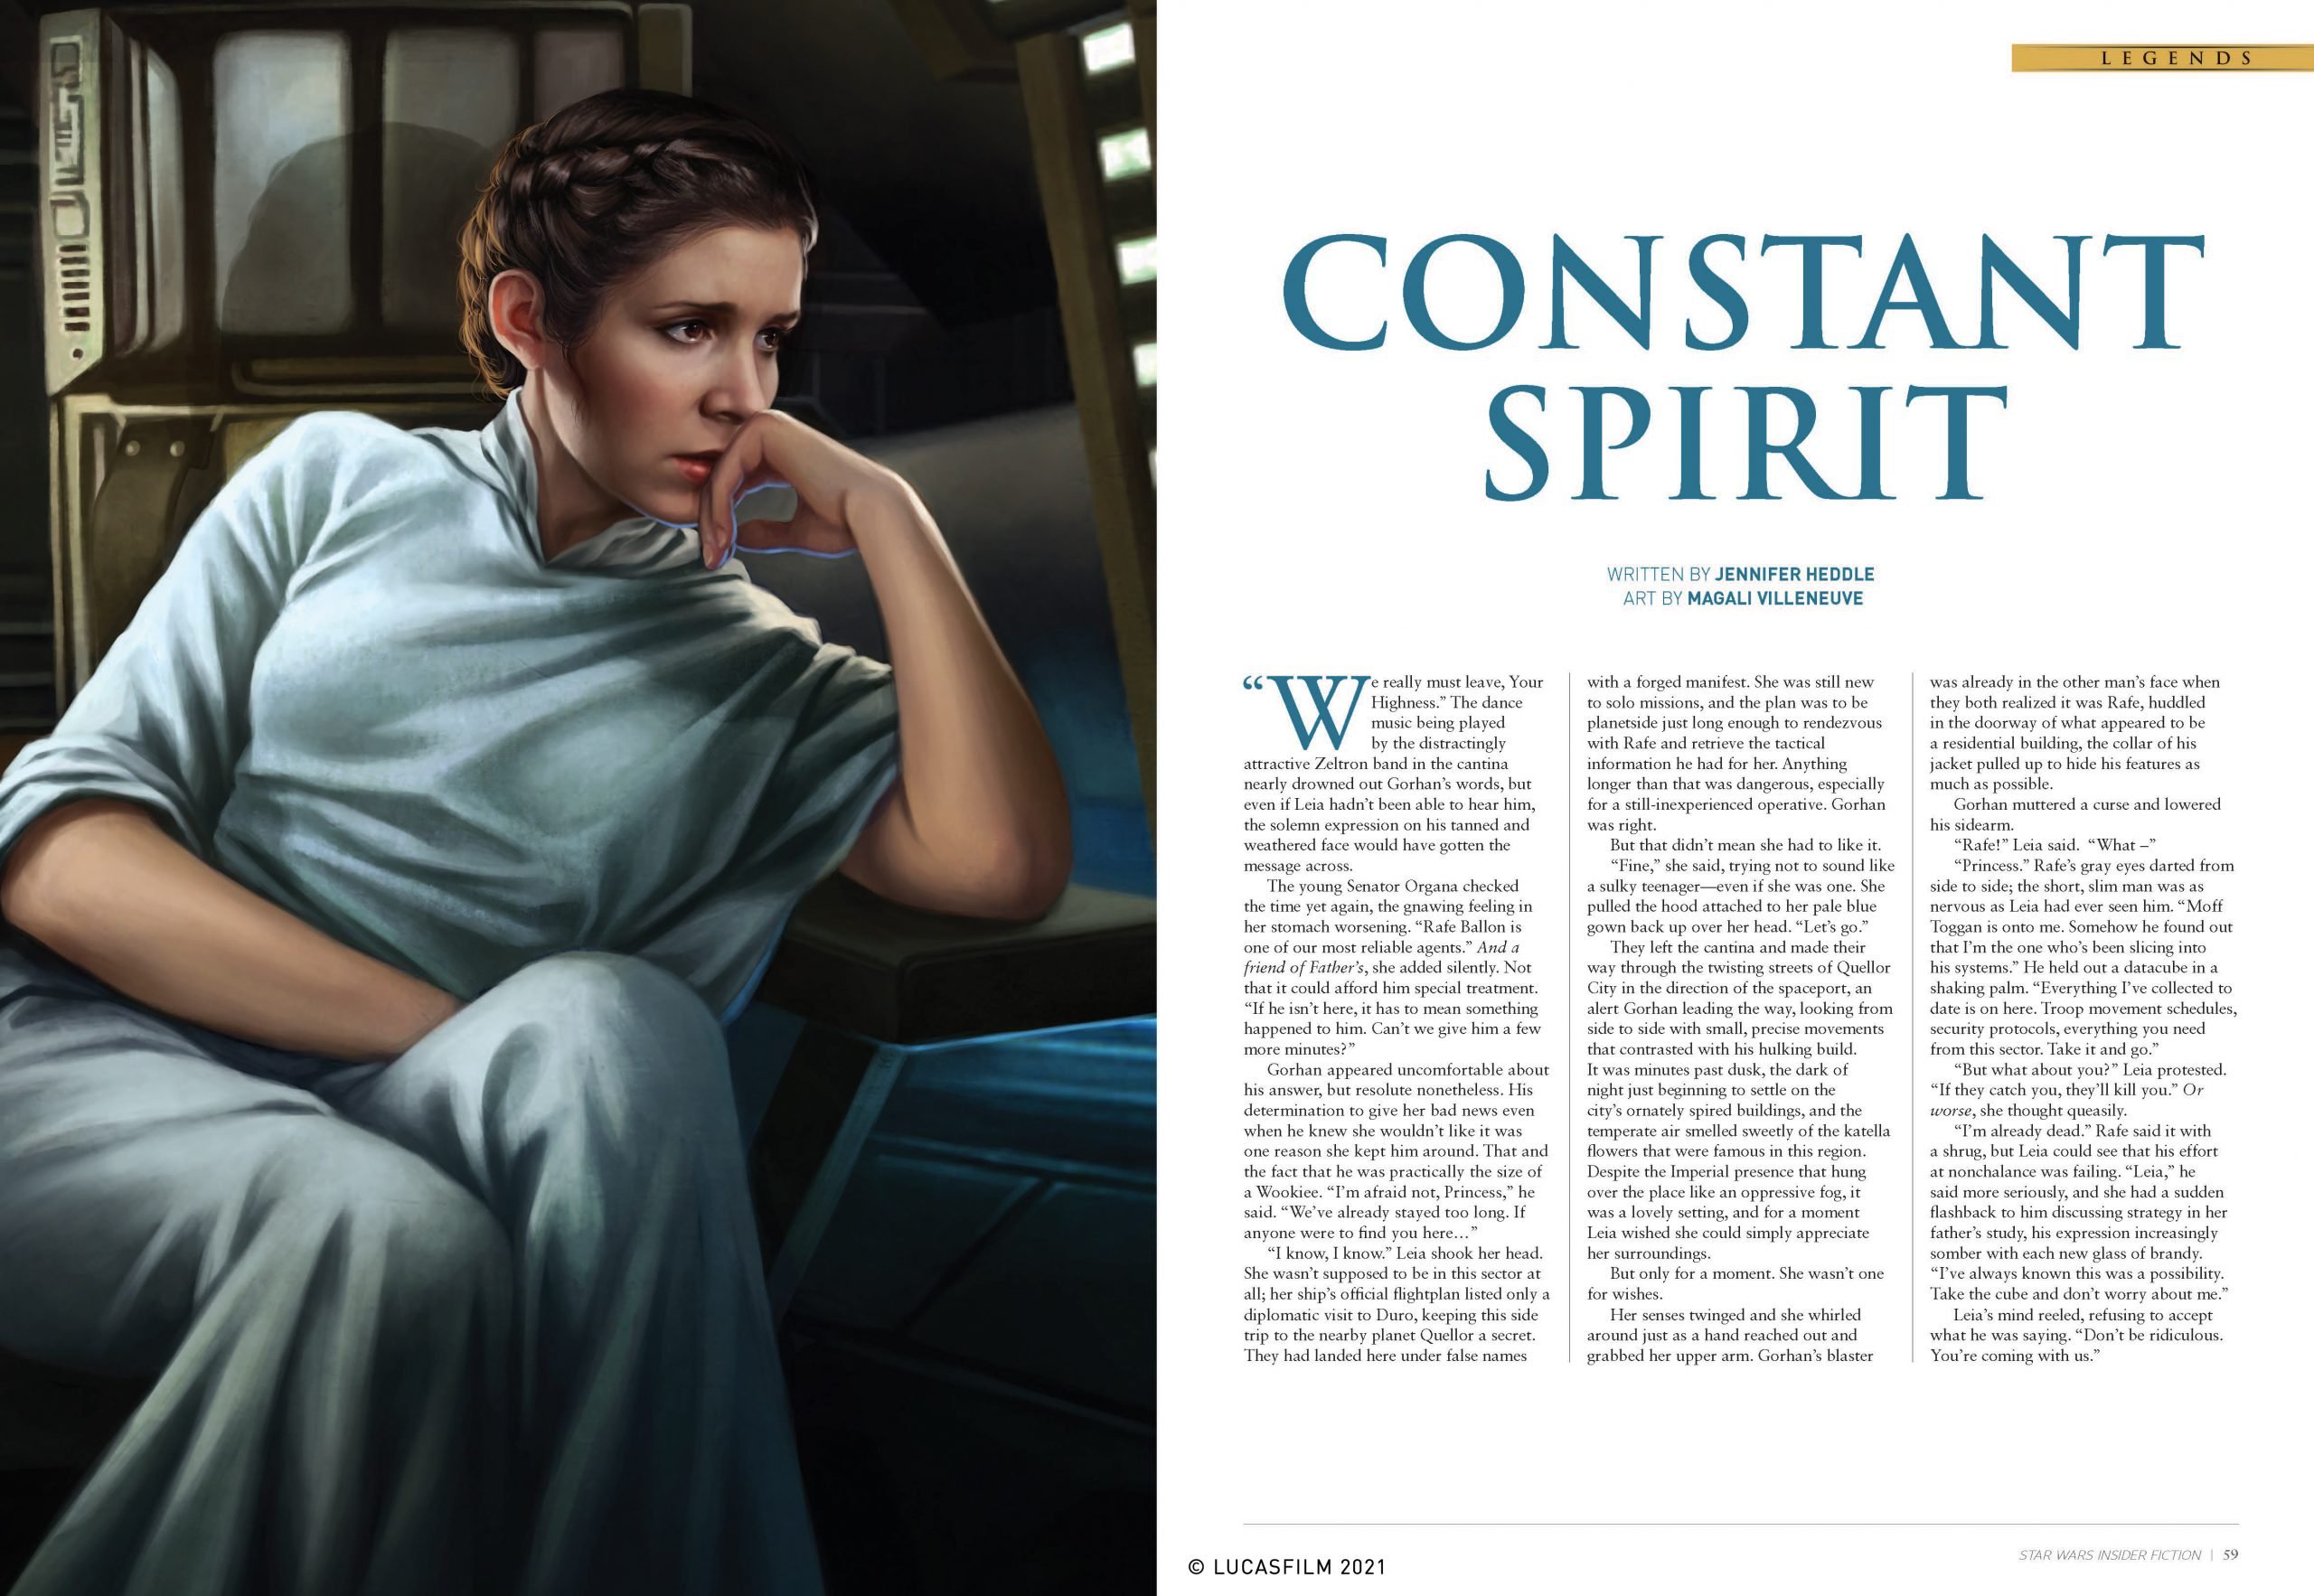 Star Wars Insider Fiction Collection Vol. 2 spread princess leia